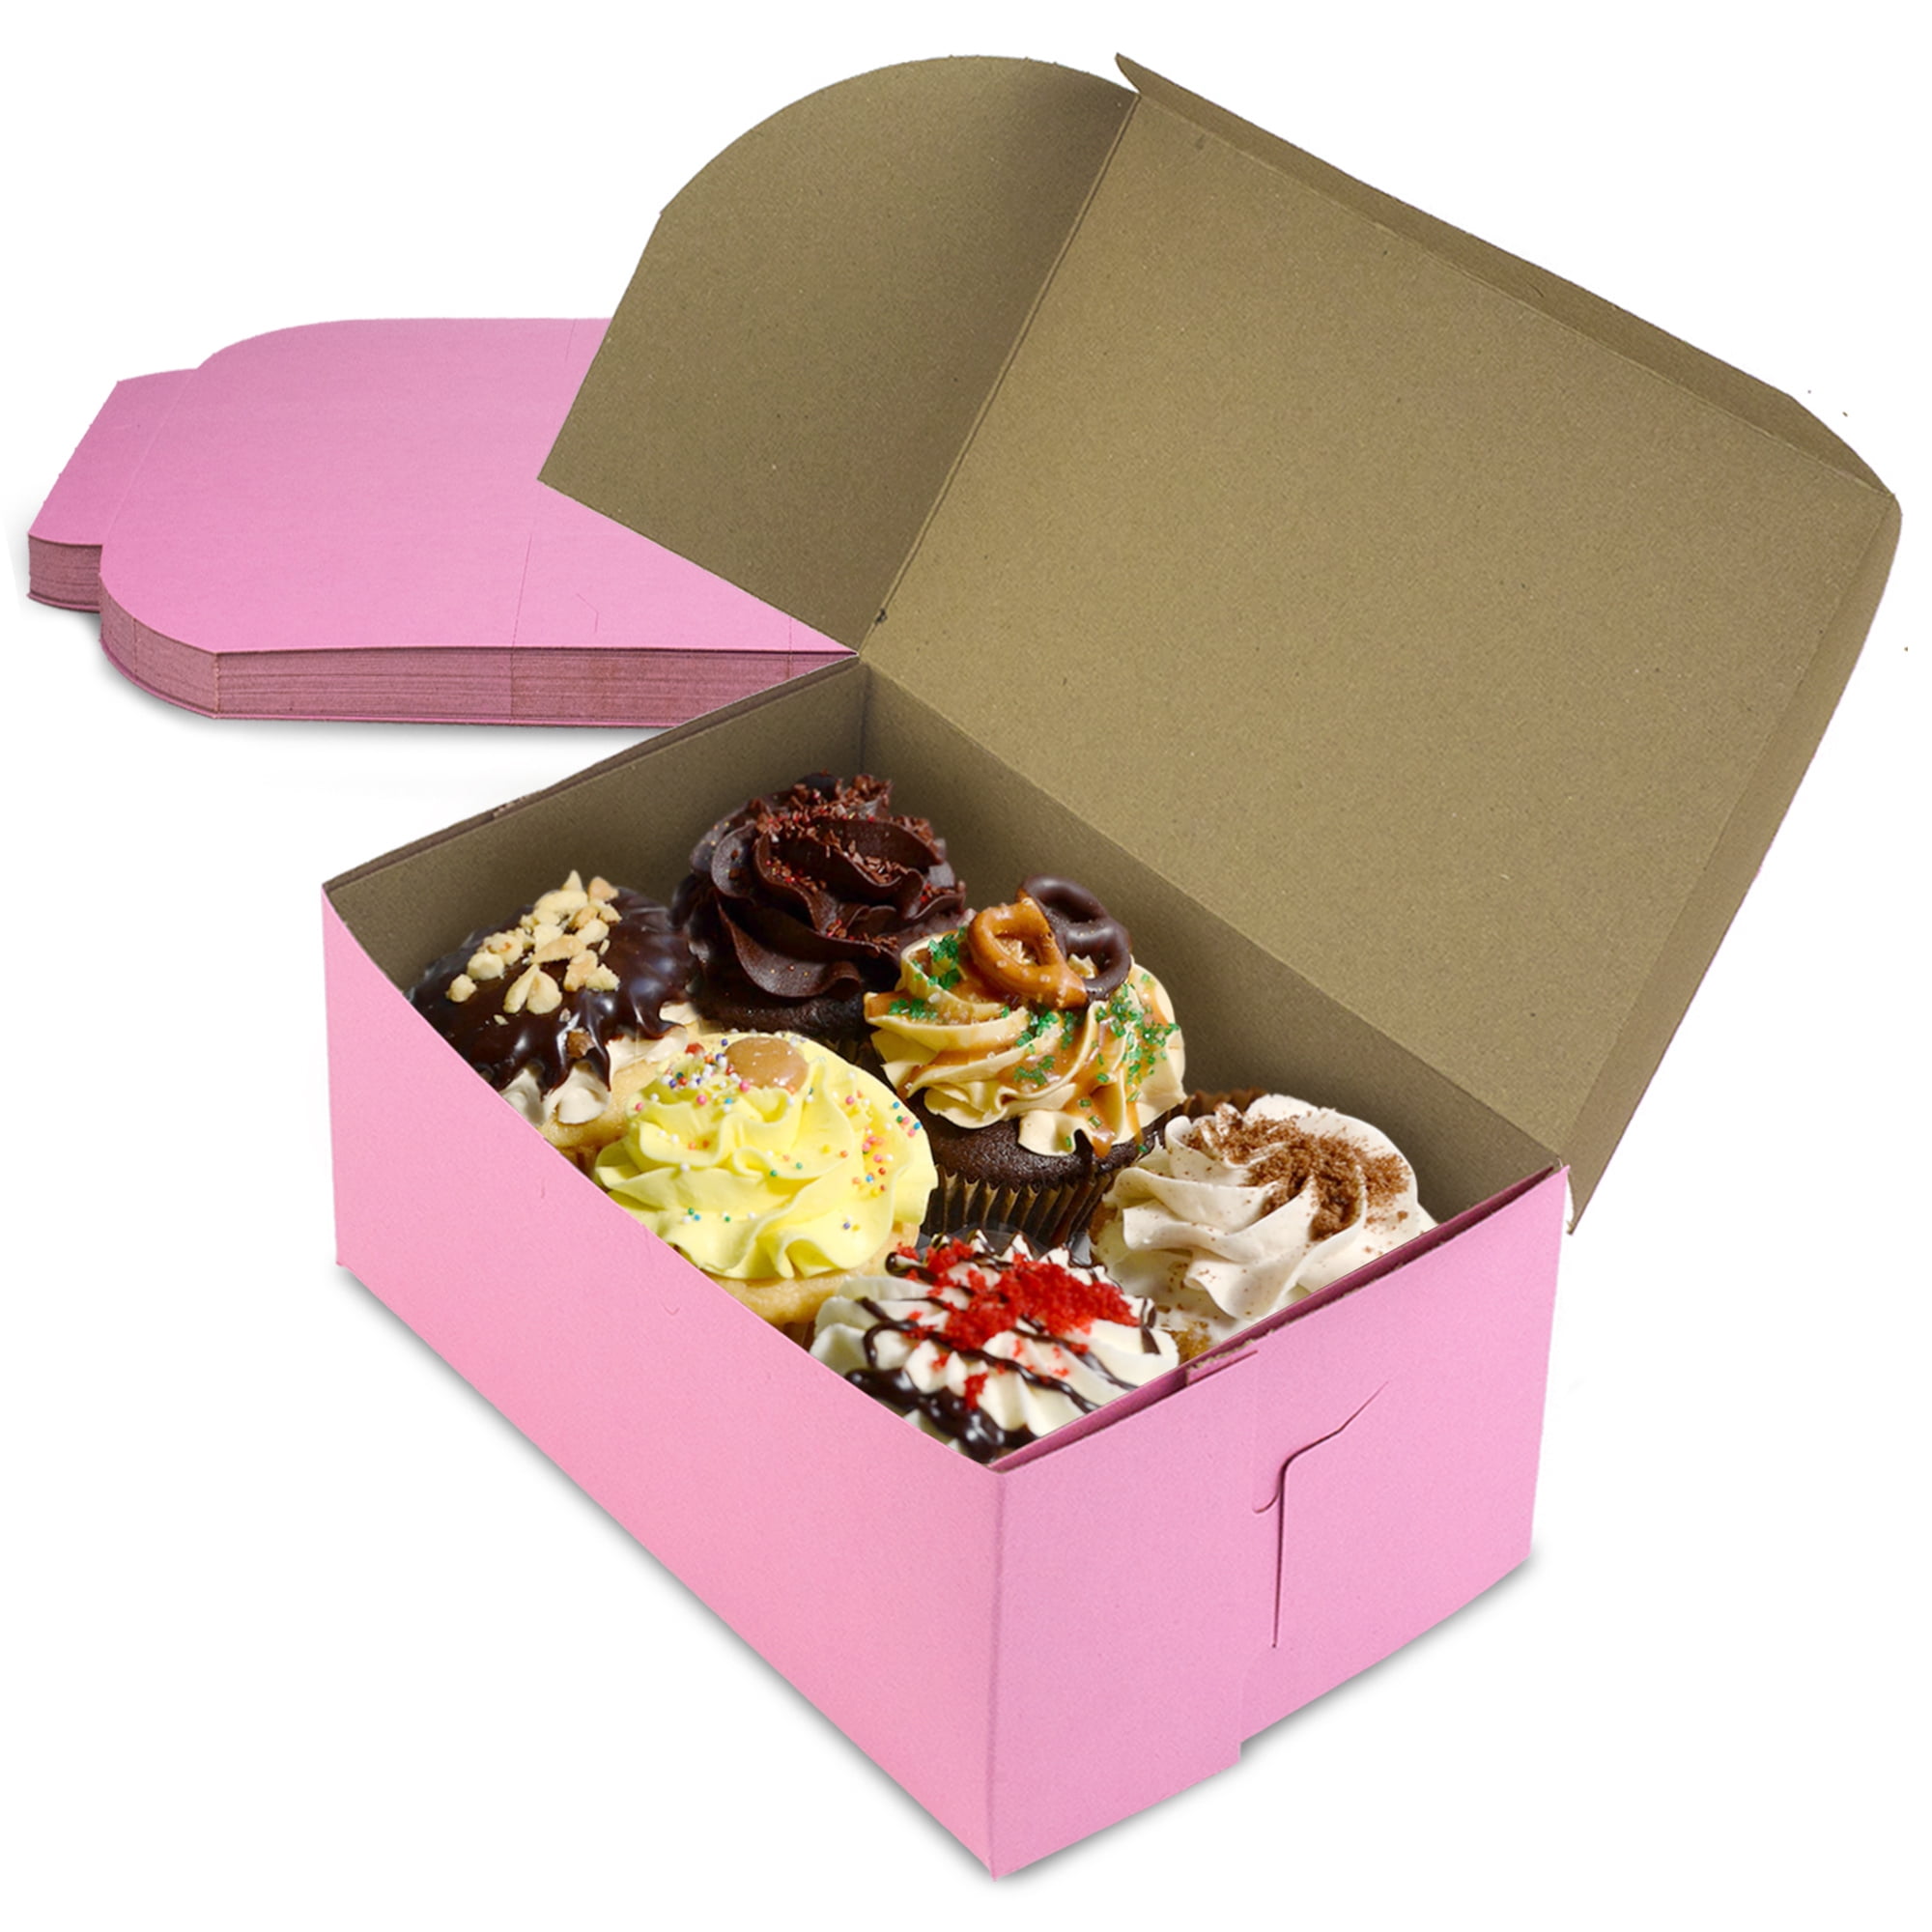 25 PINK Bakery Box 10x10x5 for Cake Pie Cupcake Cookie Candy Pastry Favor Gift 